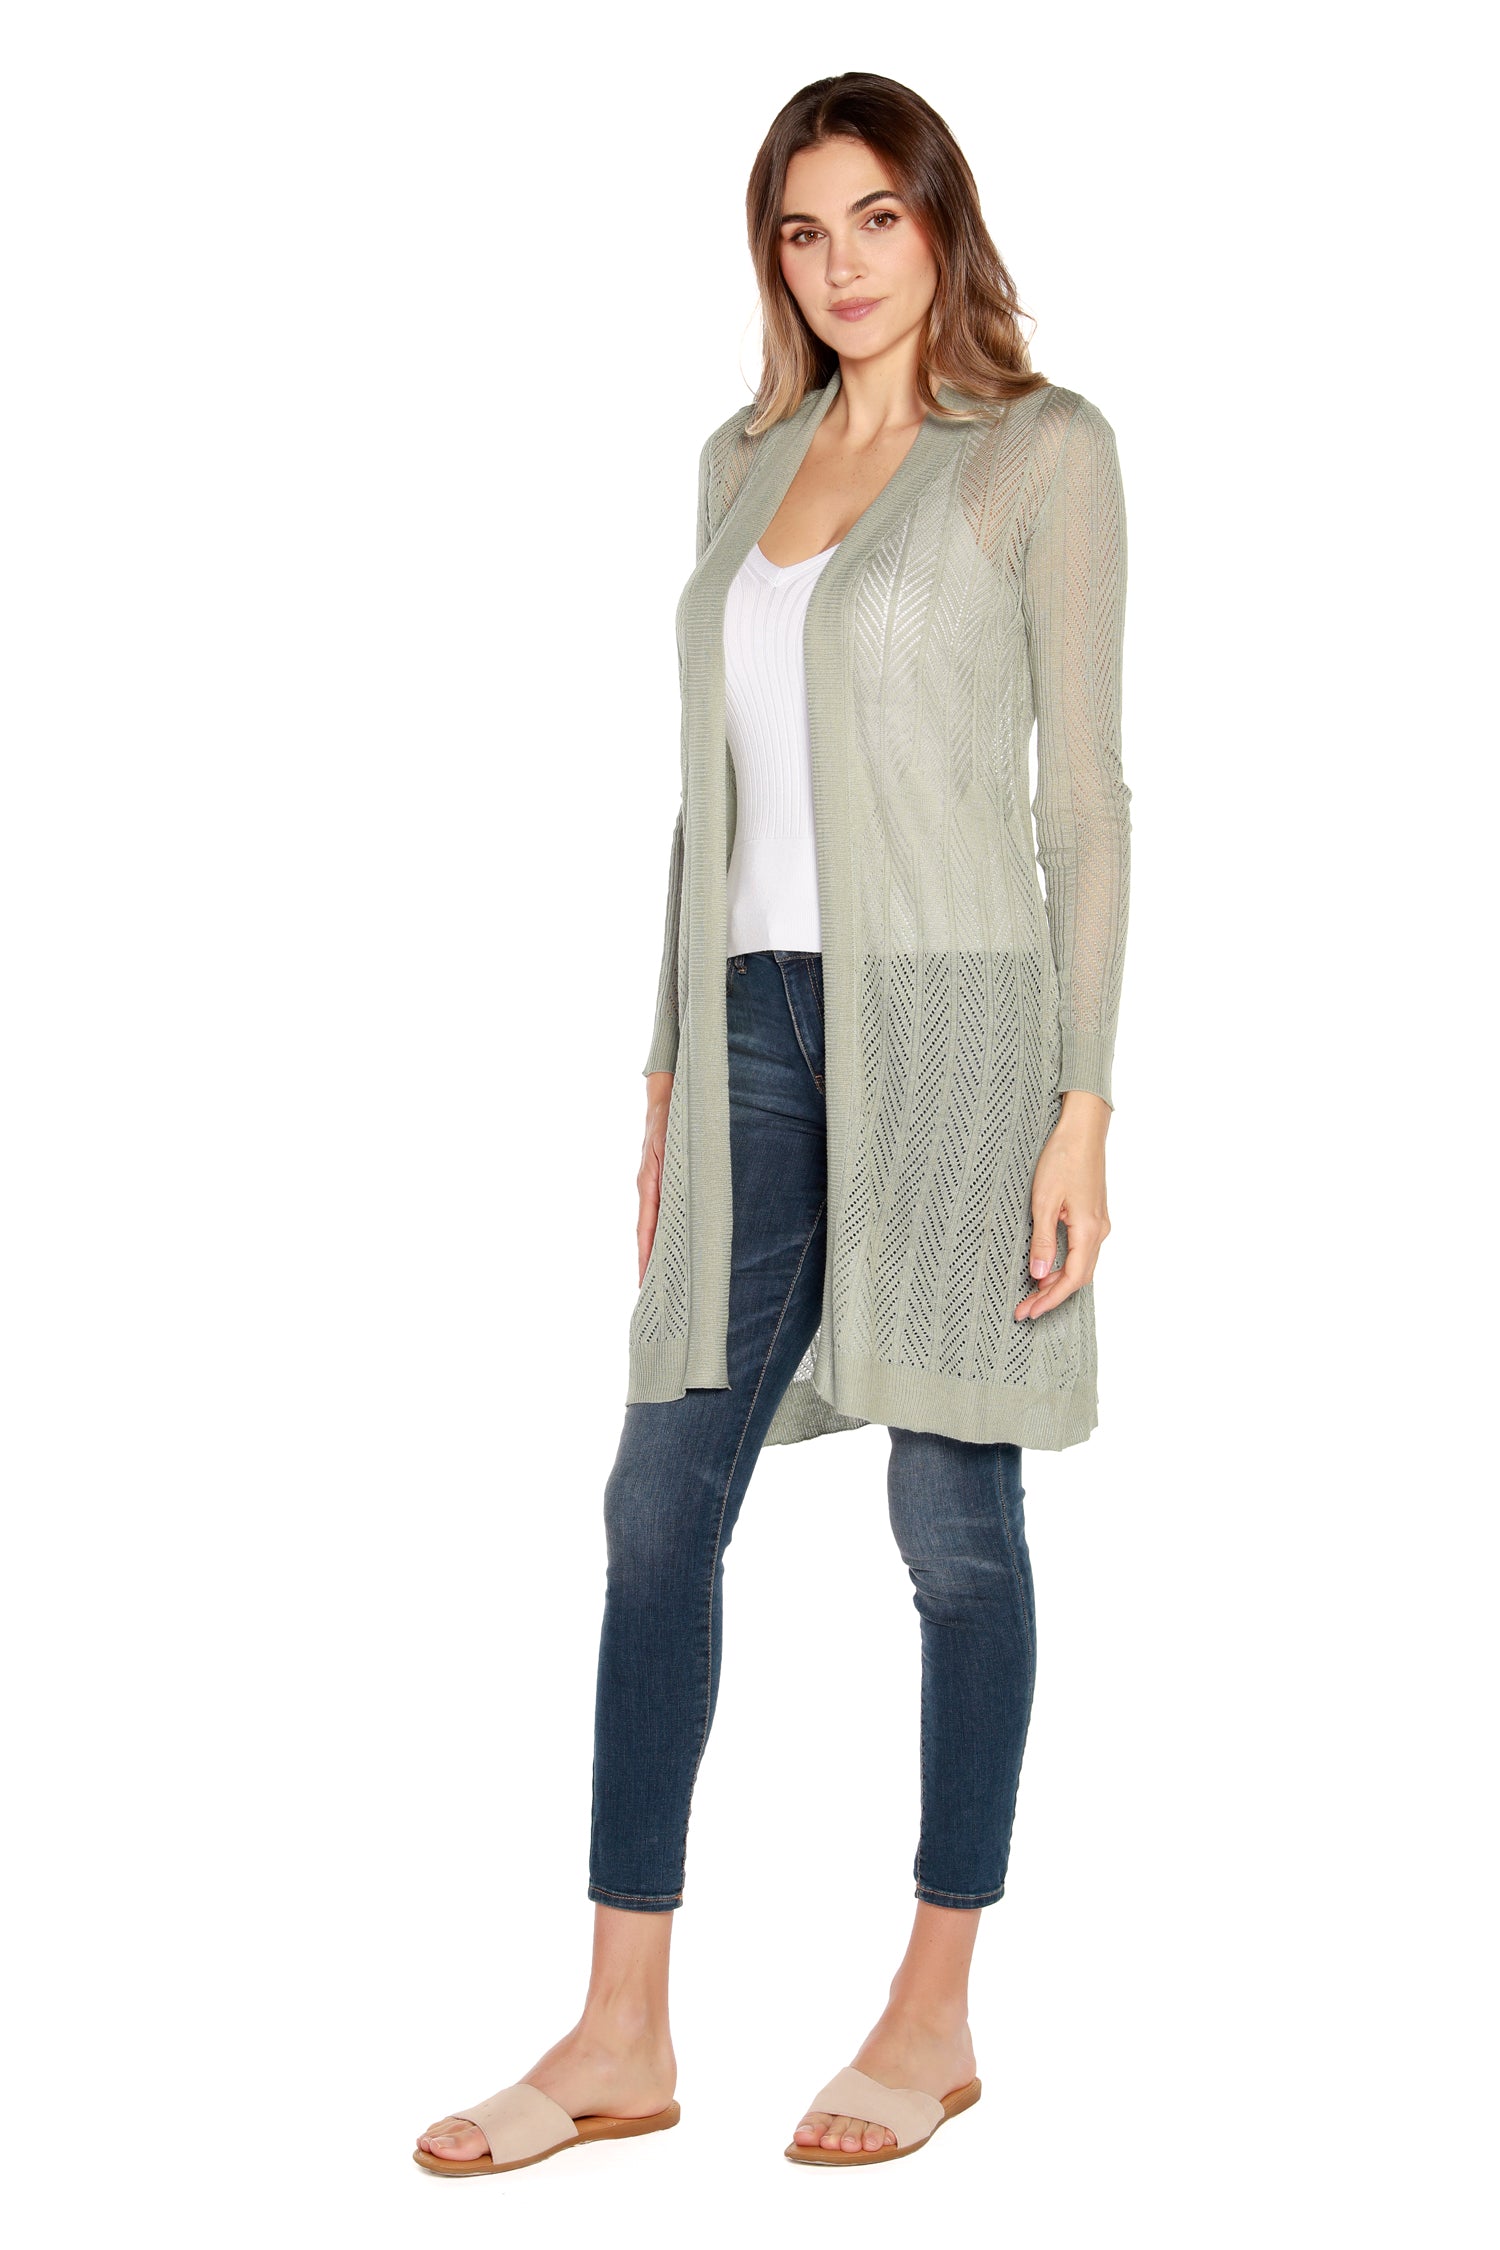 Women’s Sheer Long Cardigan with Crochet Chevron Stripes and Pointelle Stitch